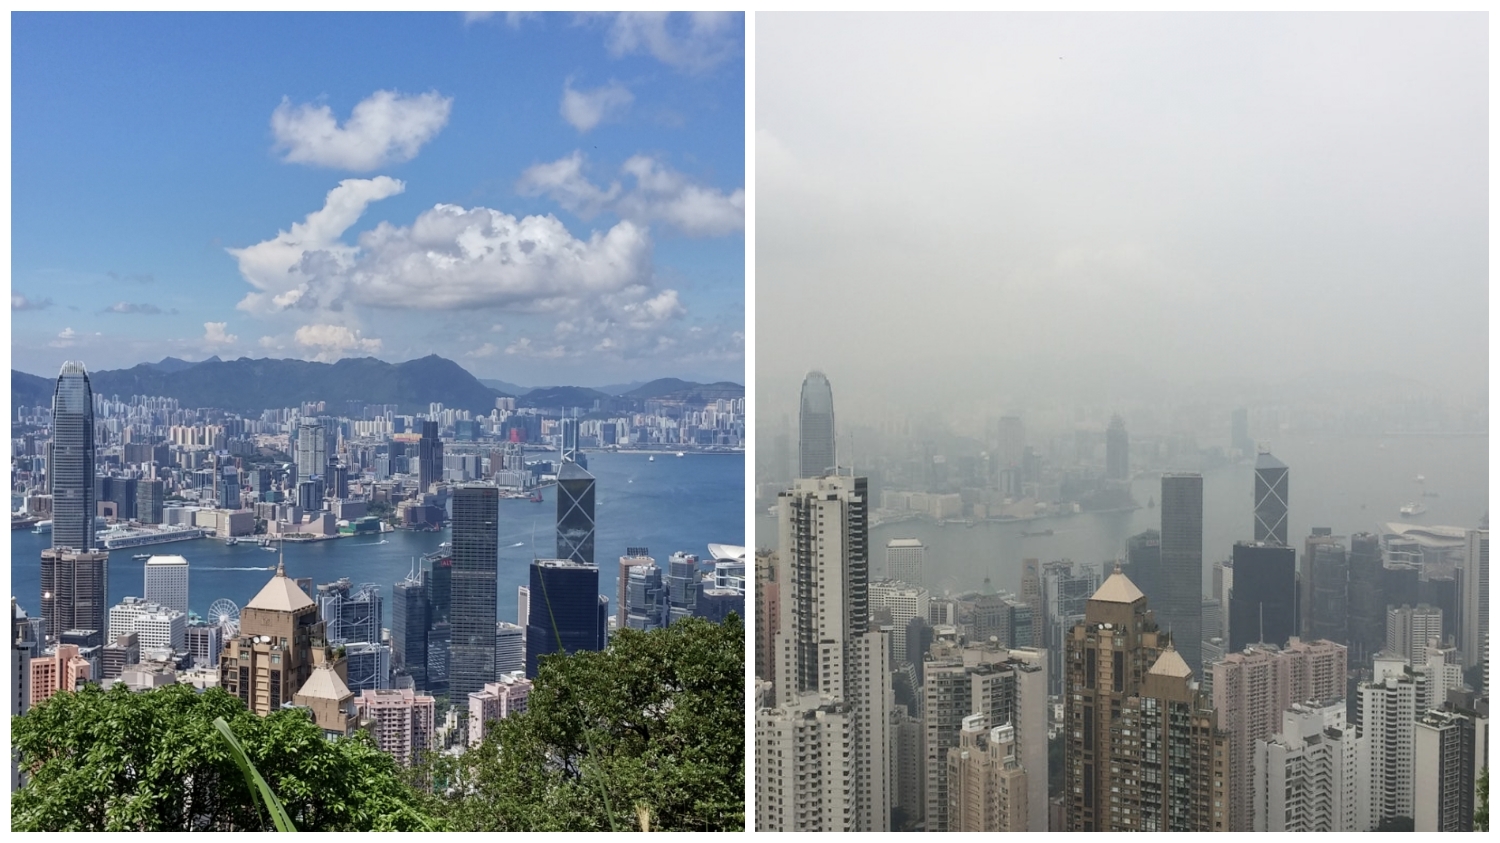 Visitors get the highest visibility in the hot and wet summertime in Hong Kong. Spring's weather can be foggy.